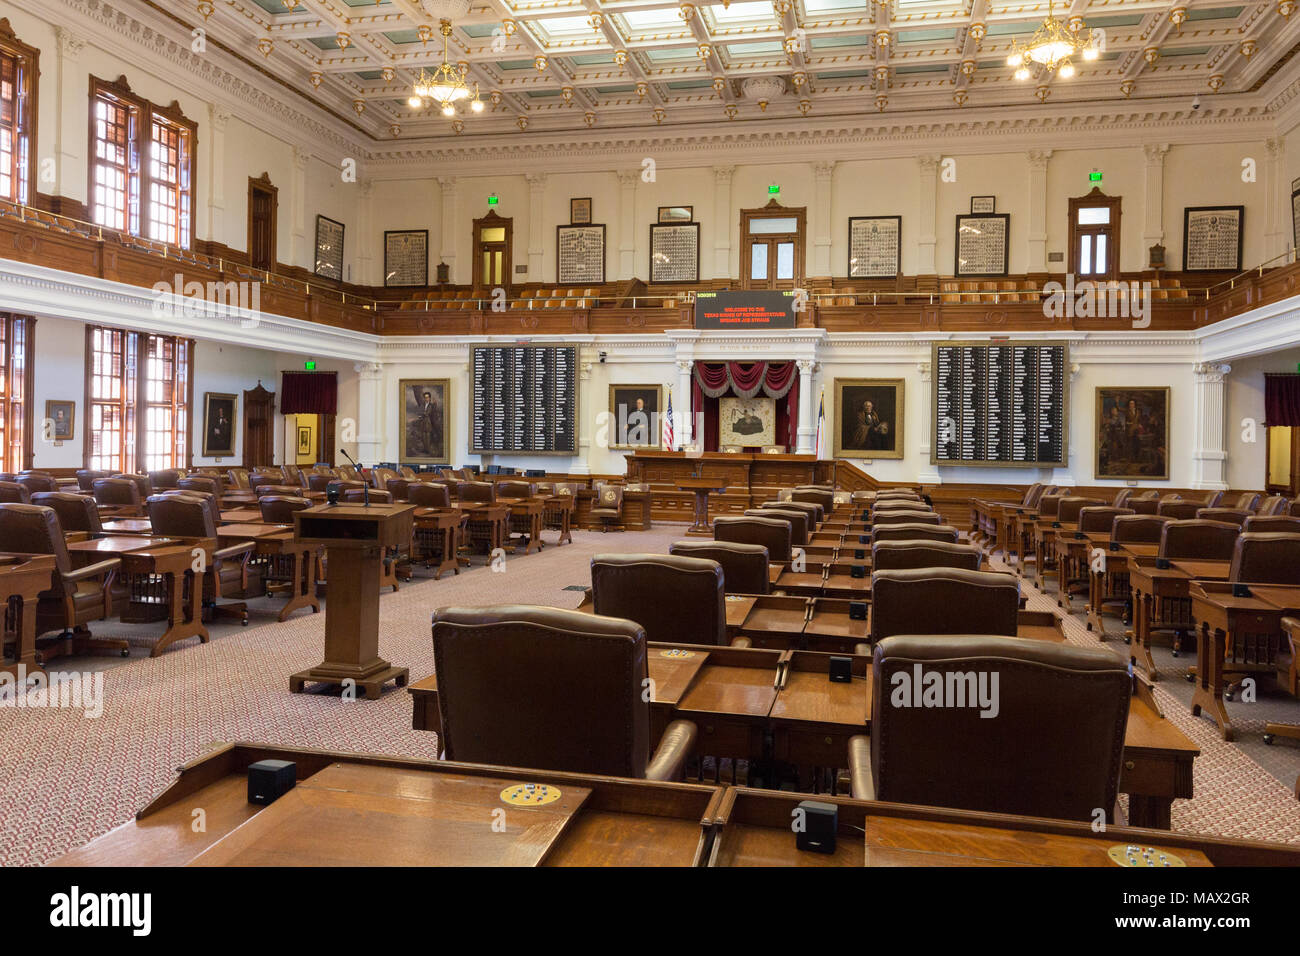 Texas House of representatives, in the interior of the Texas State Capitol building, Austin, Texas USA Stock Photo